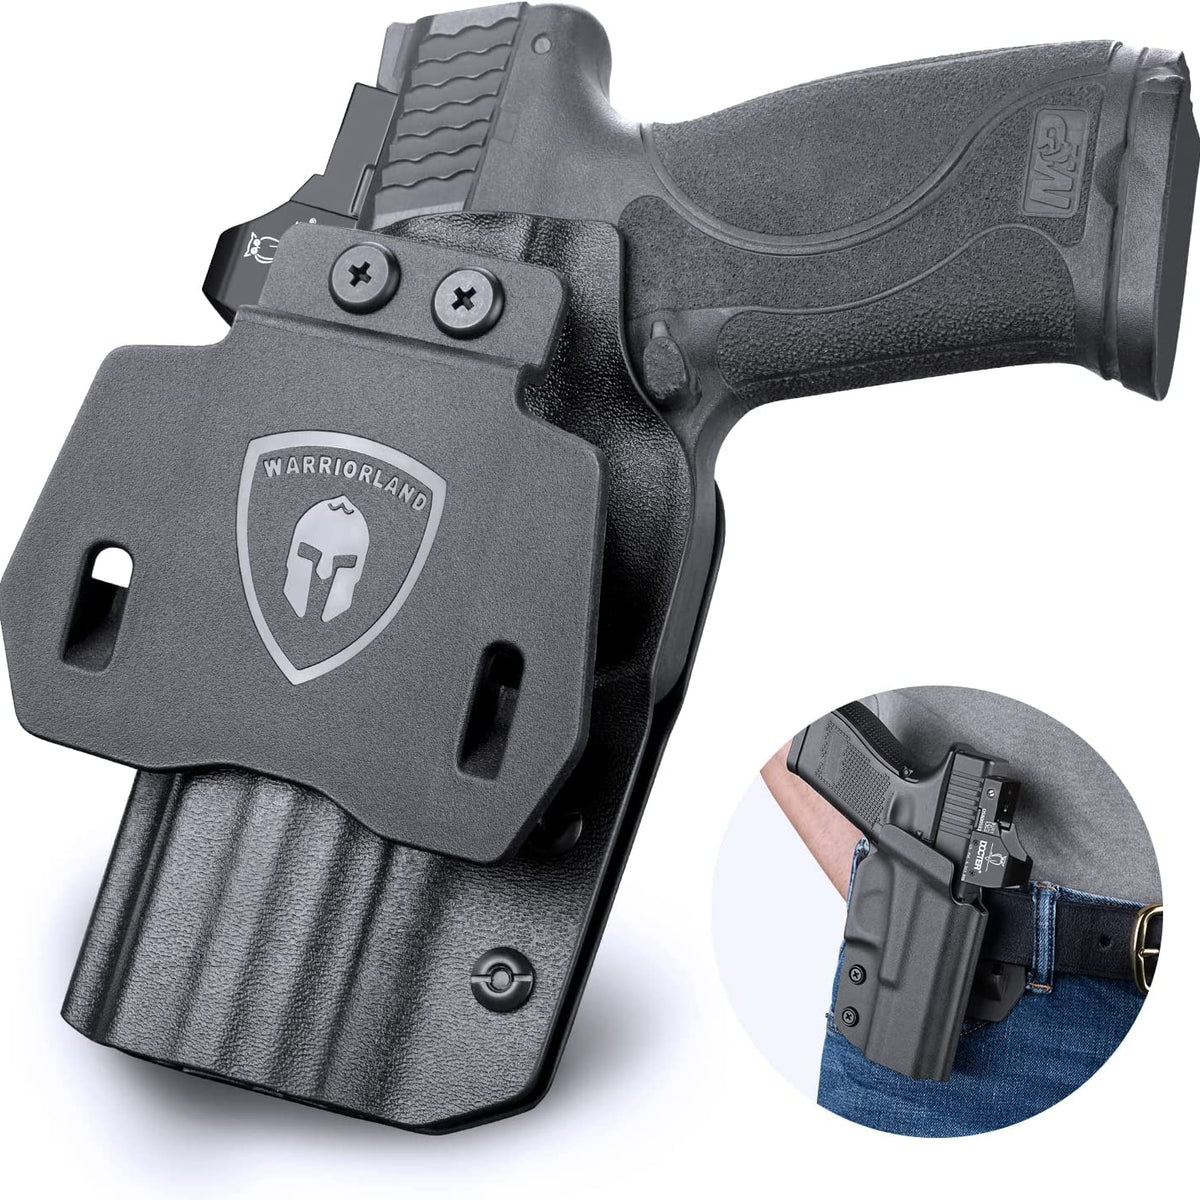 OWB Kydex Holster for S&W M&P M2.0 9mm / .40 3.6